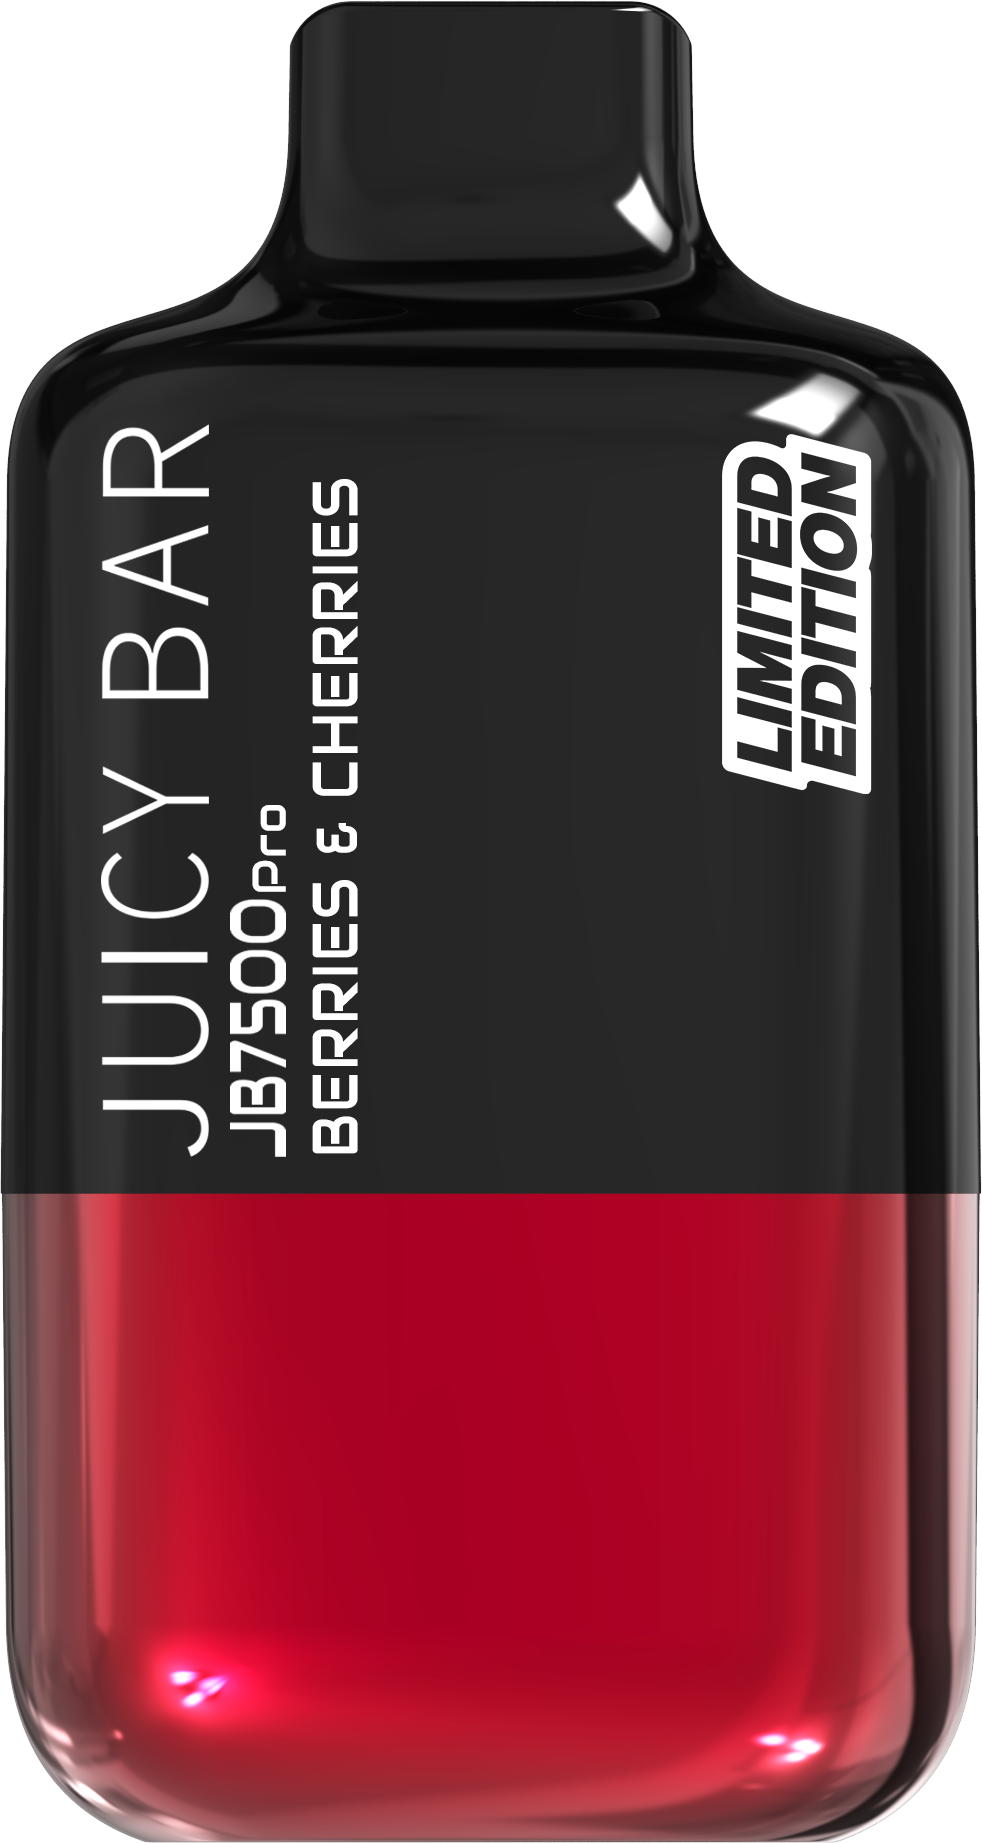 Juicy Bar Pro Edition 7500 Puffs 5% | Berries and Cherries